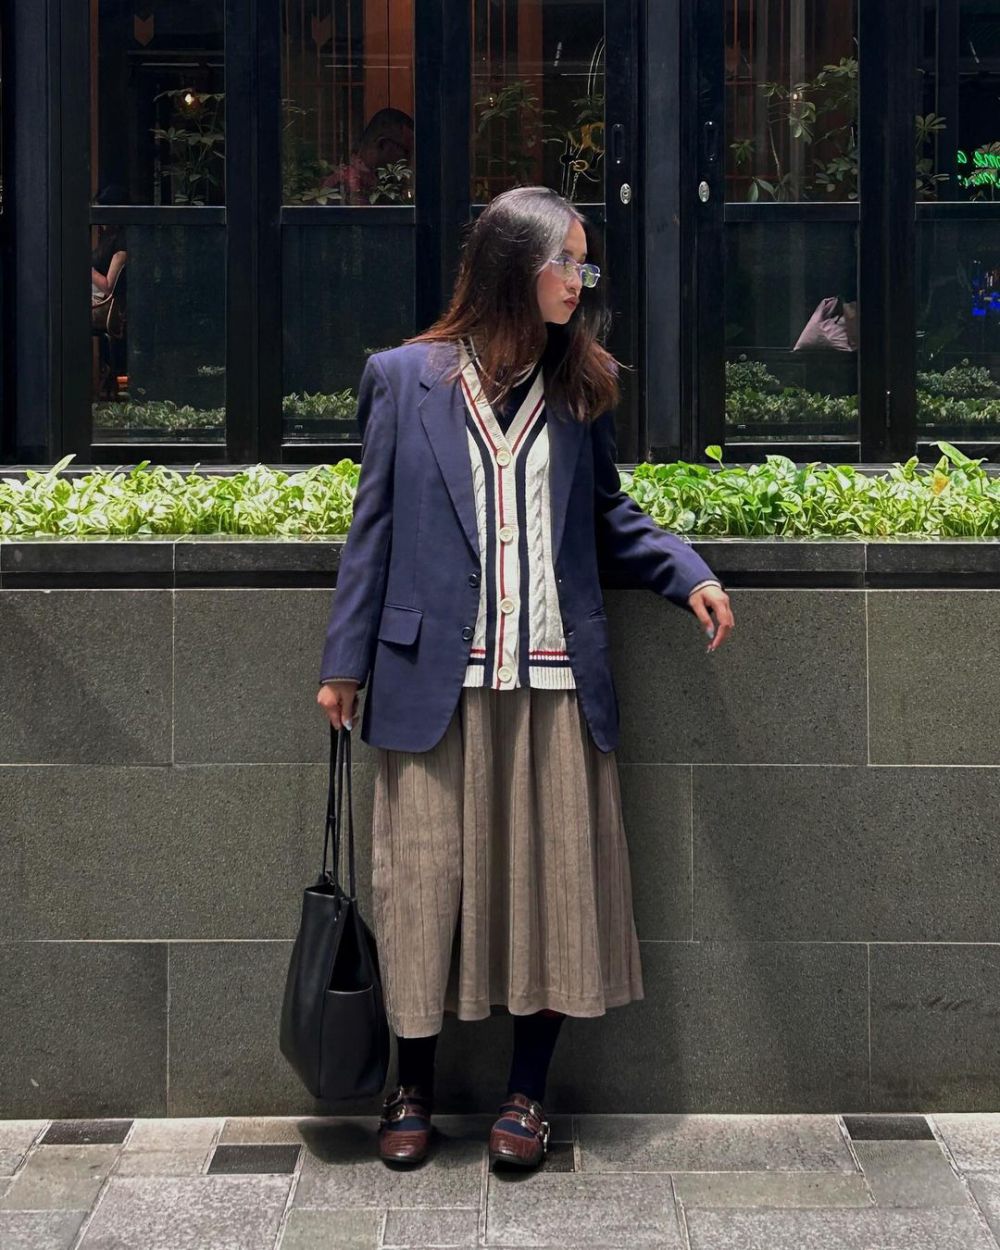 11 Ide Outfit Layering ala Annete Lupita, Ciptakan Look Smart Casual!